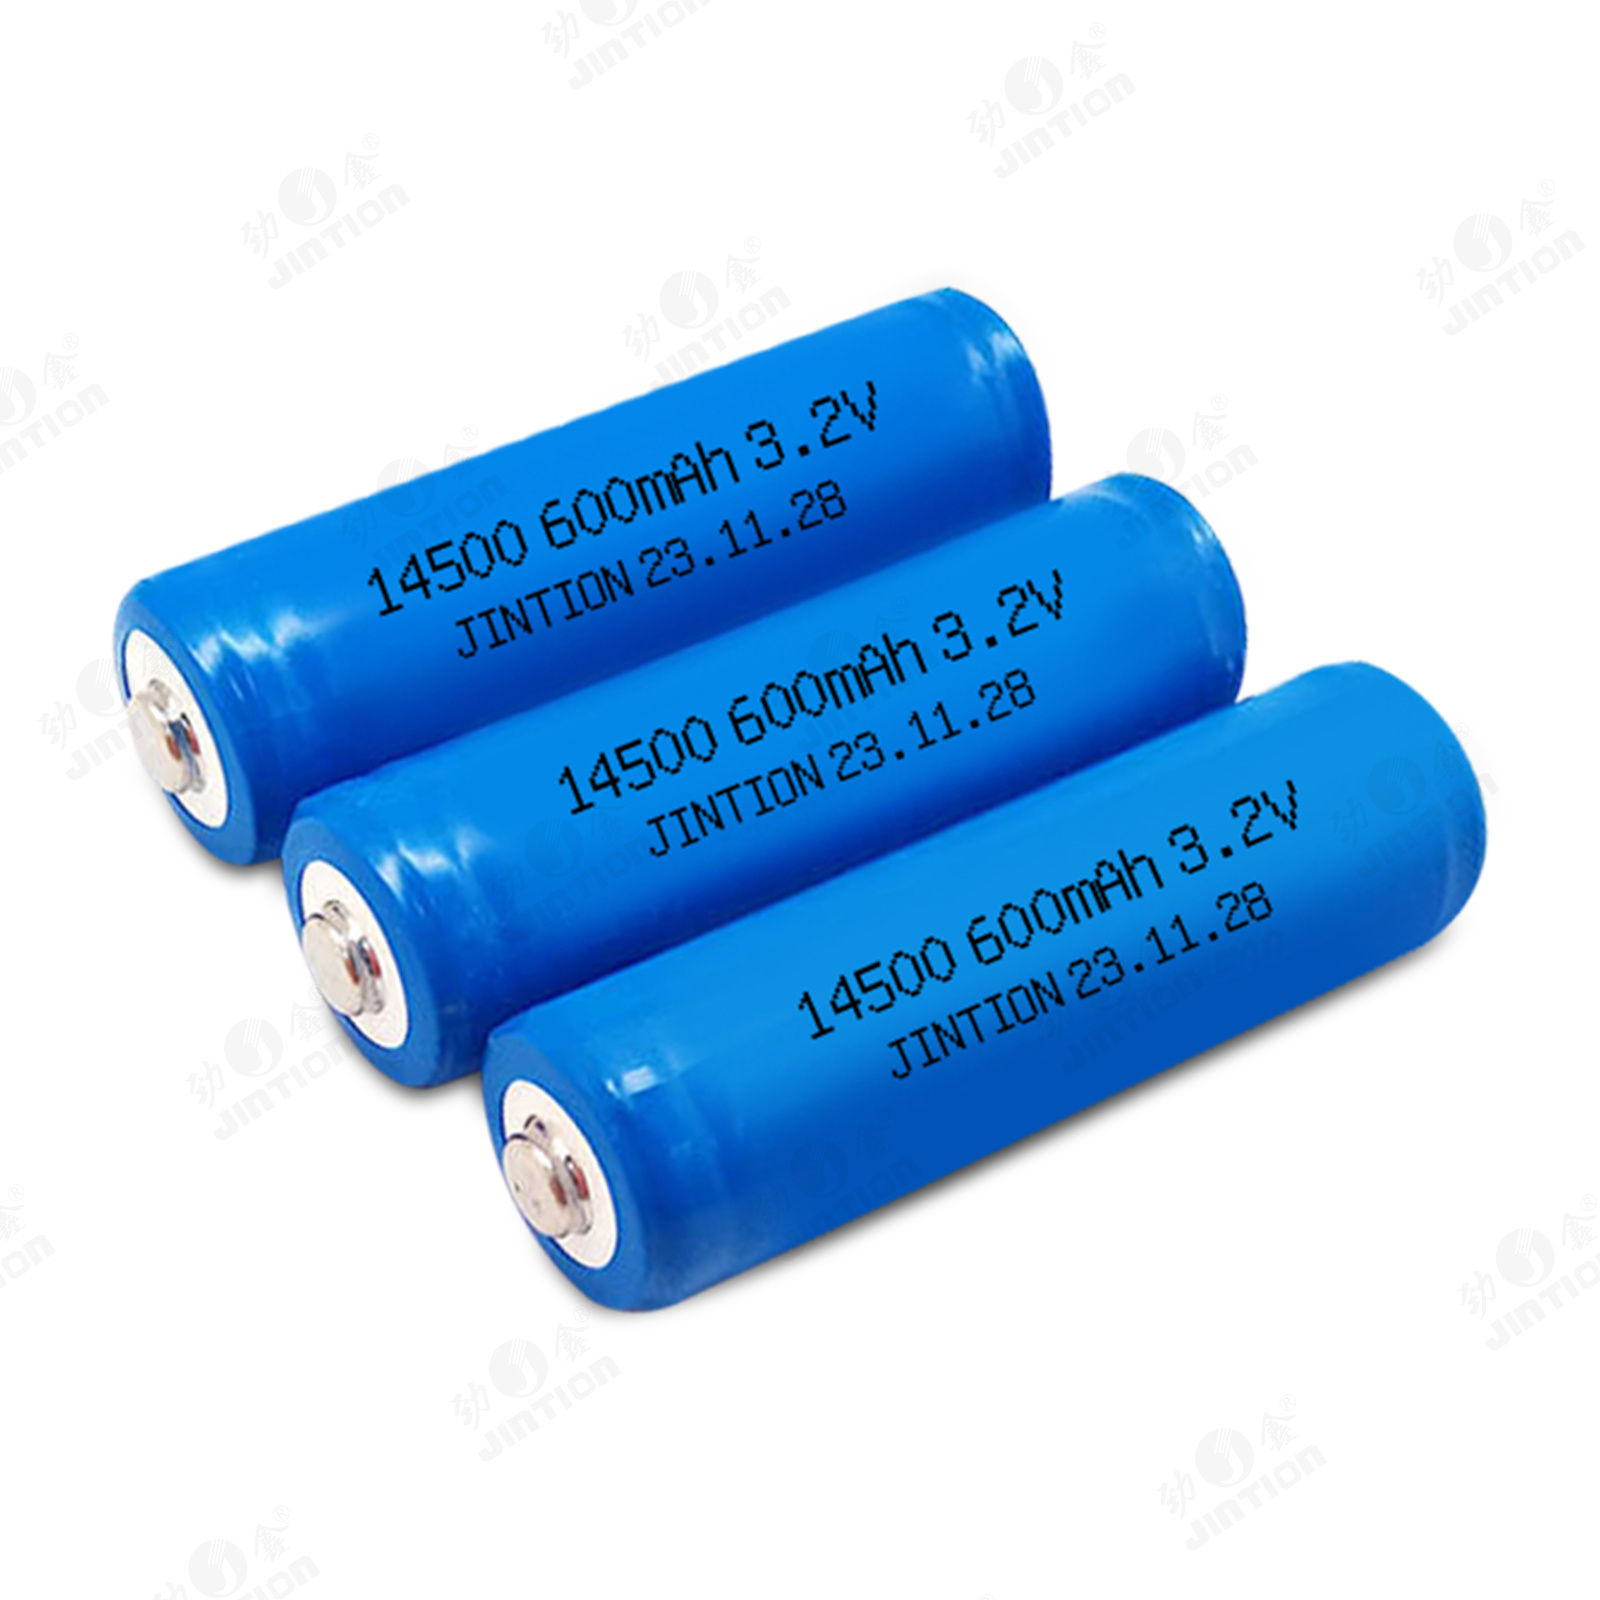 JINTION 14500 600mah 3.2v lithium ion battery 3.2v lipo 600ah 14500 lithium ion battery for wireless products